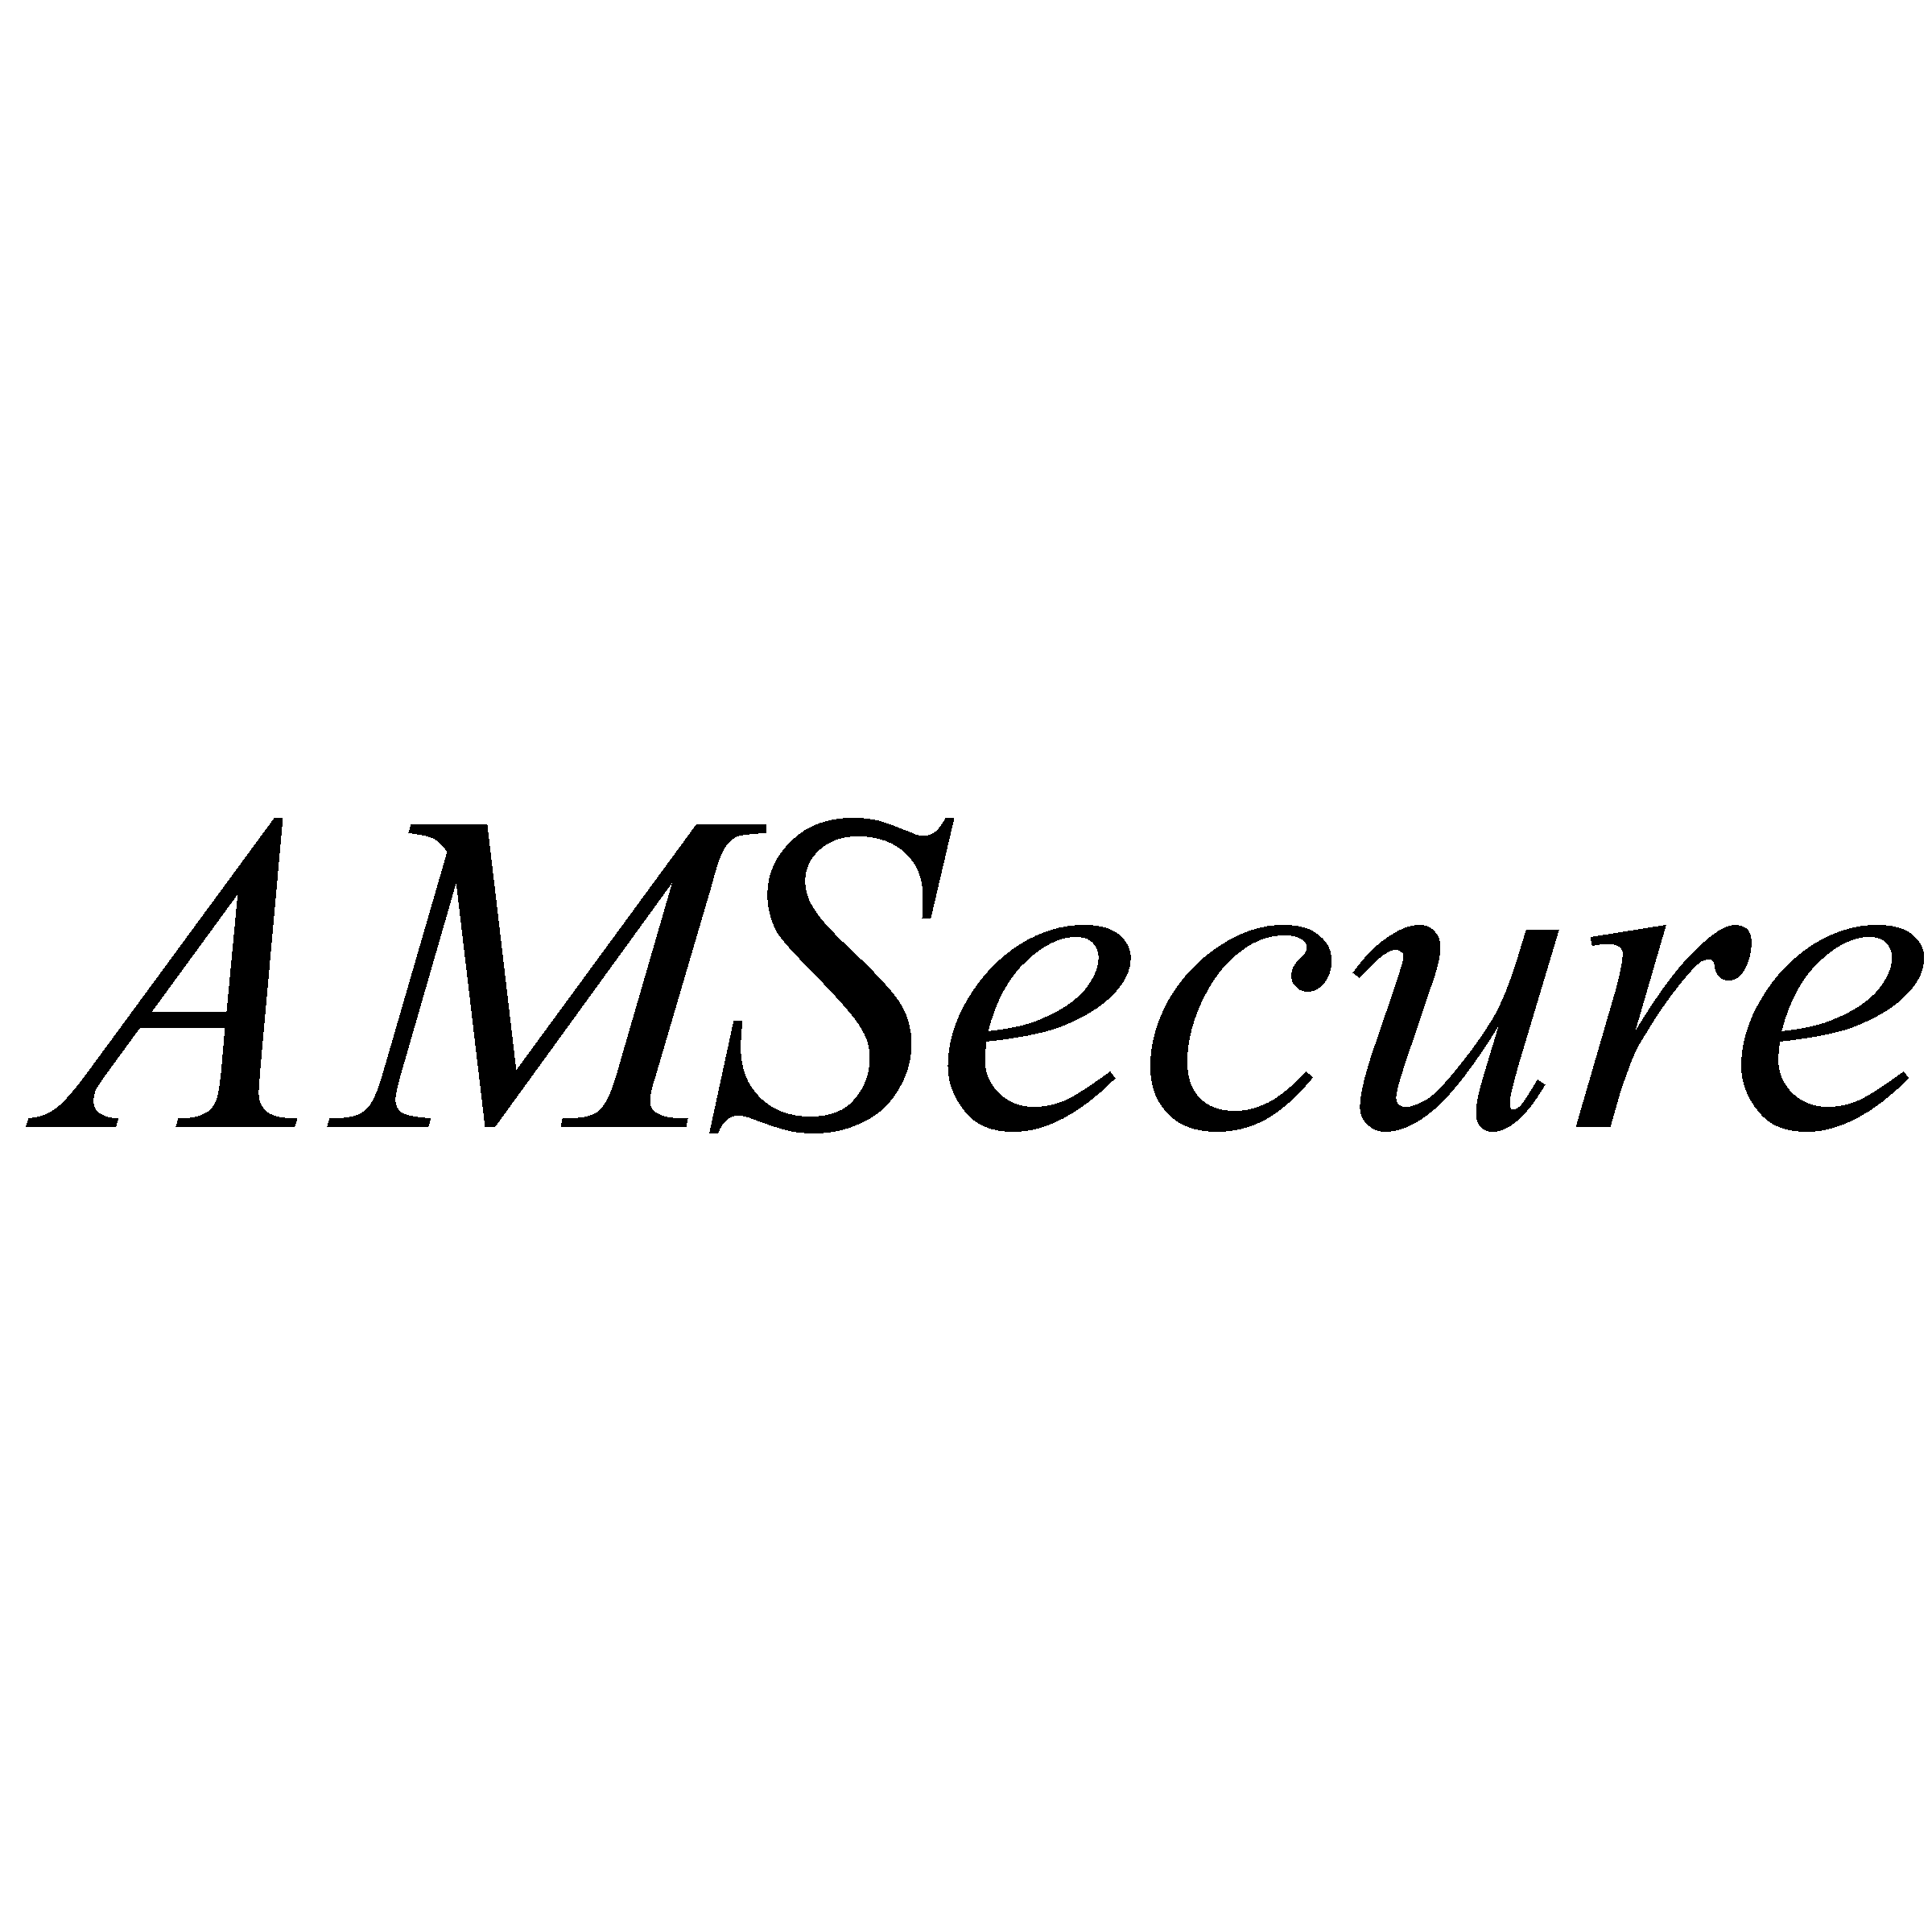  AMSECURE